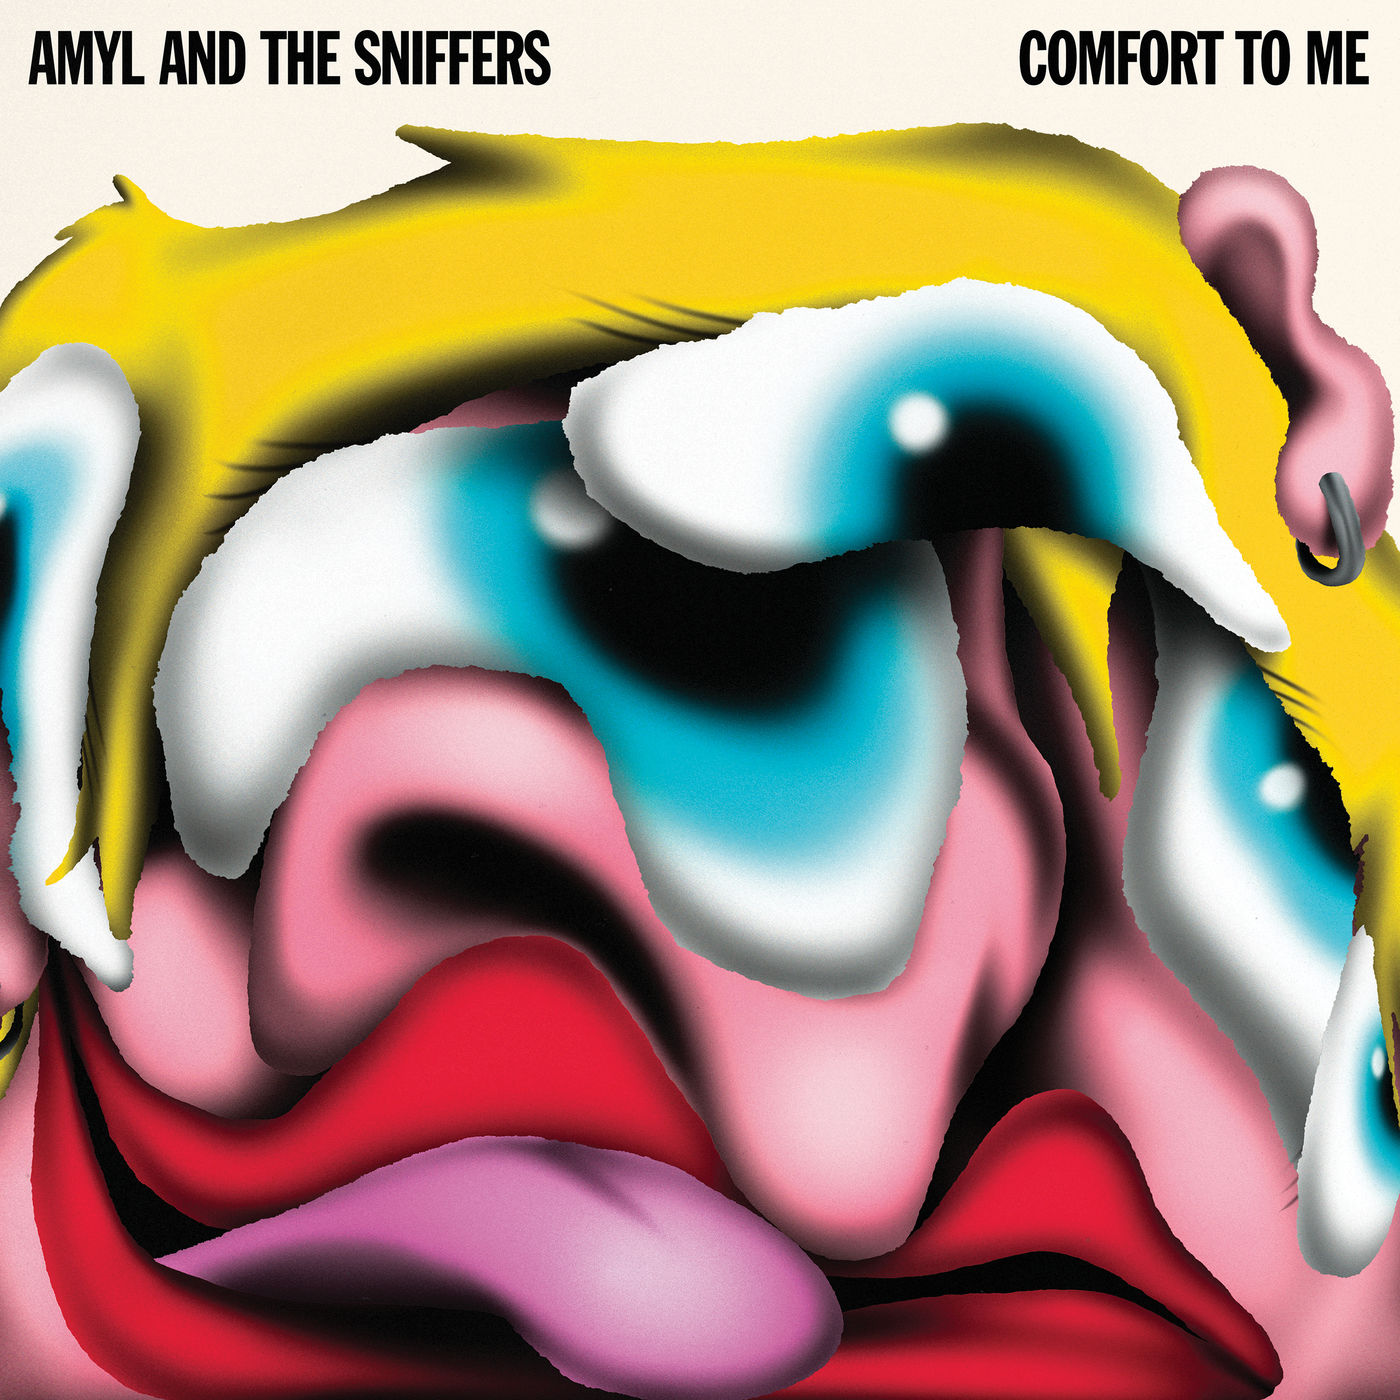 Amyl and The Sniffers - Comfort To Me (2021) [FLAC 24bit/96kHz]